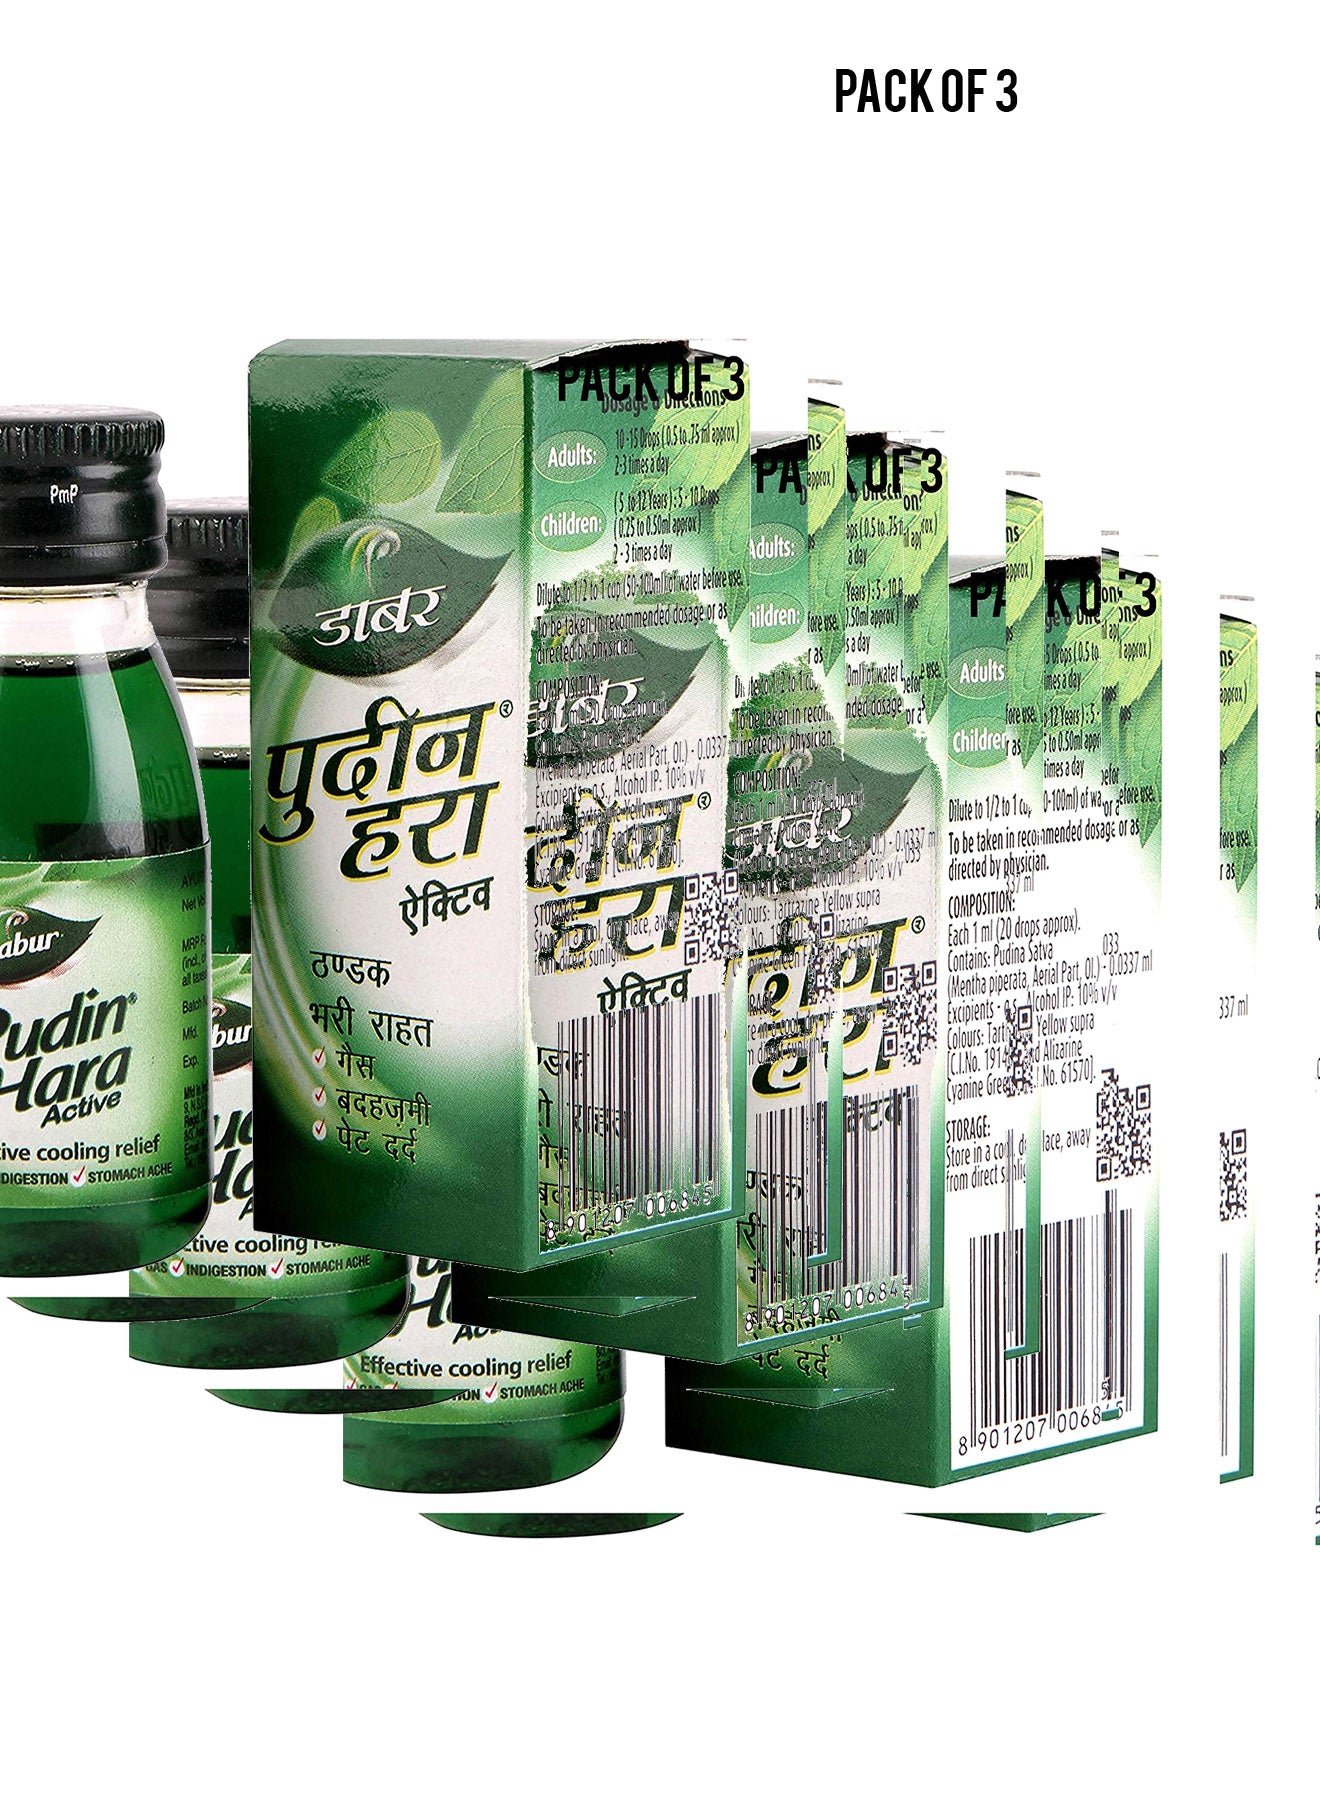 Dabur Pudin Hara Active Digestive Solution 30 ml Value Pack of 3 